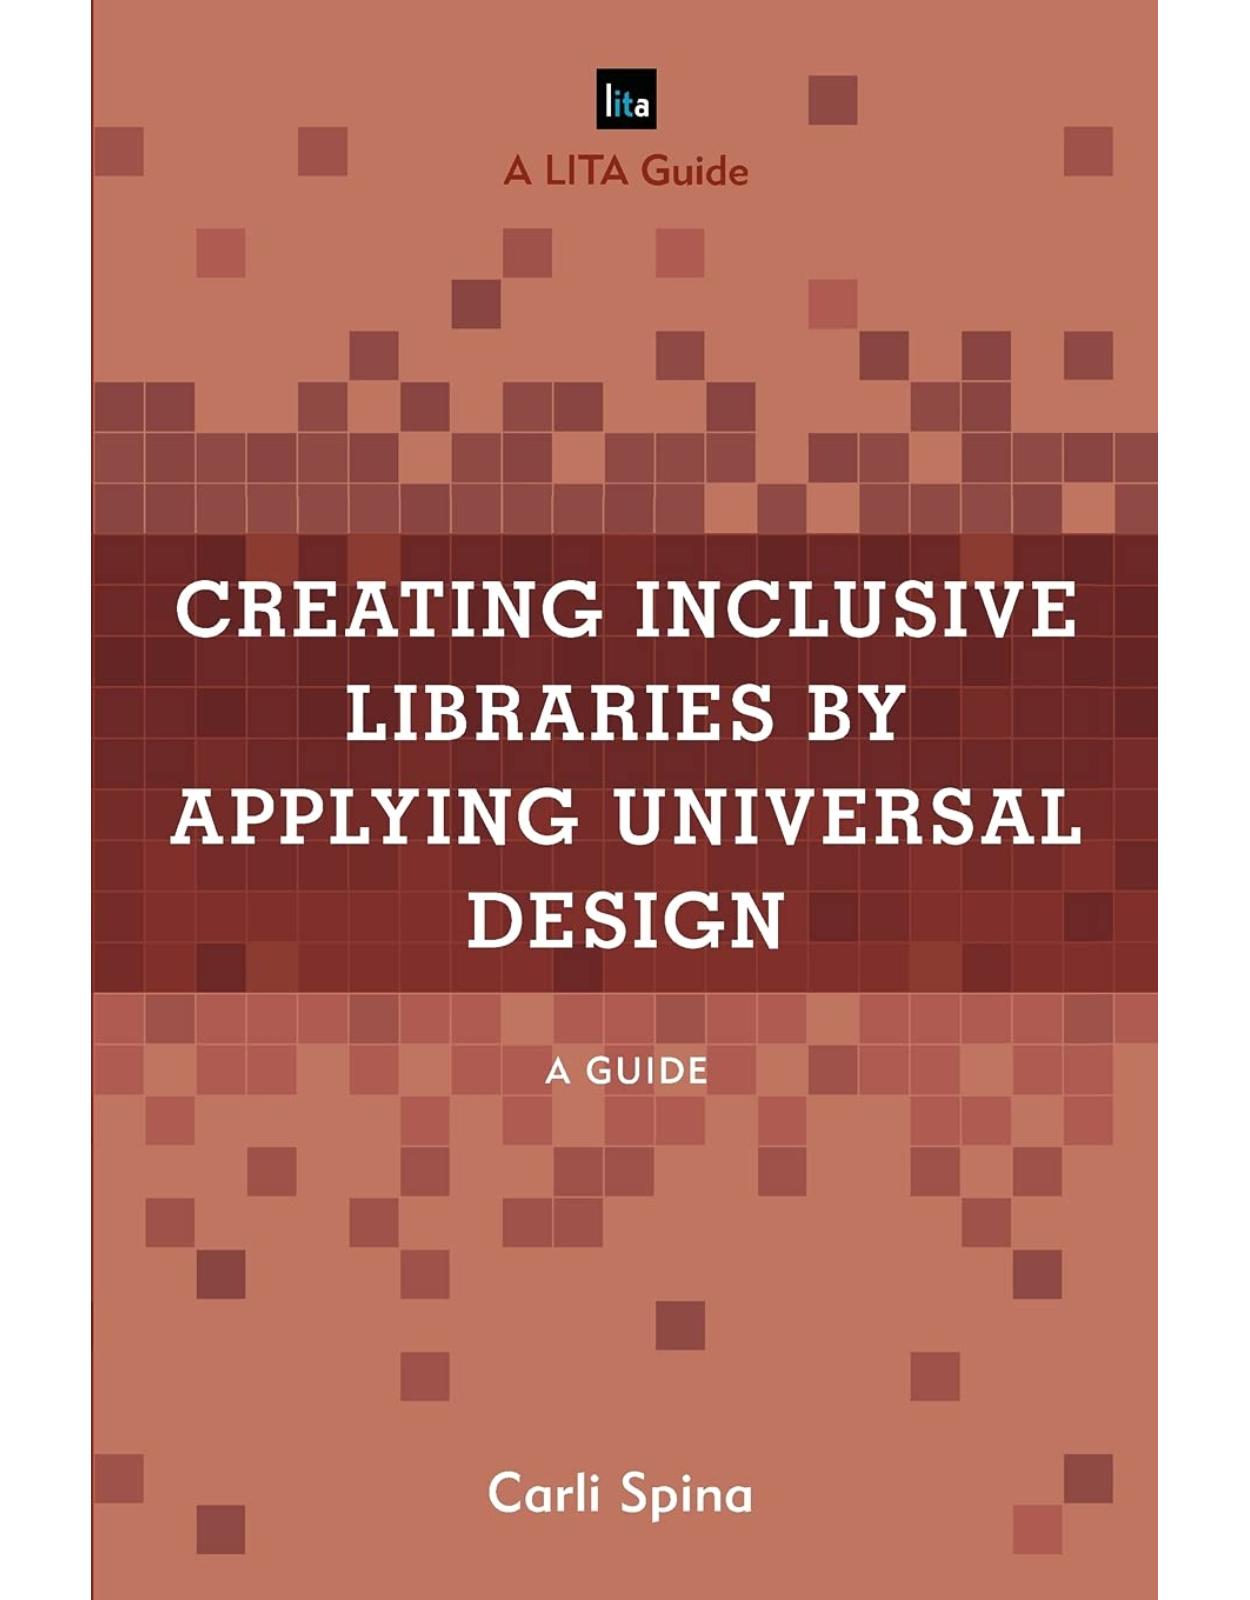 Creating Inclusive Libraries by Applying Universal Design: A Guide (LITA Guides) 